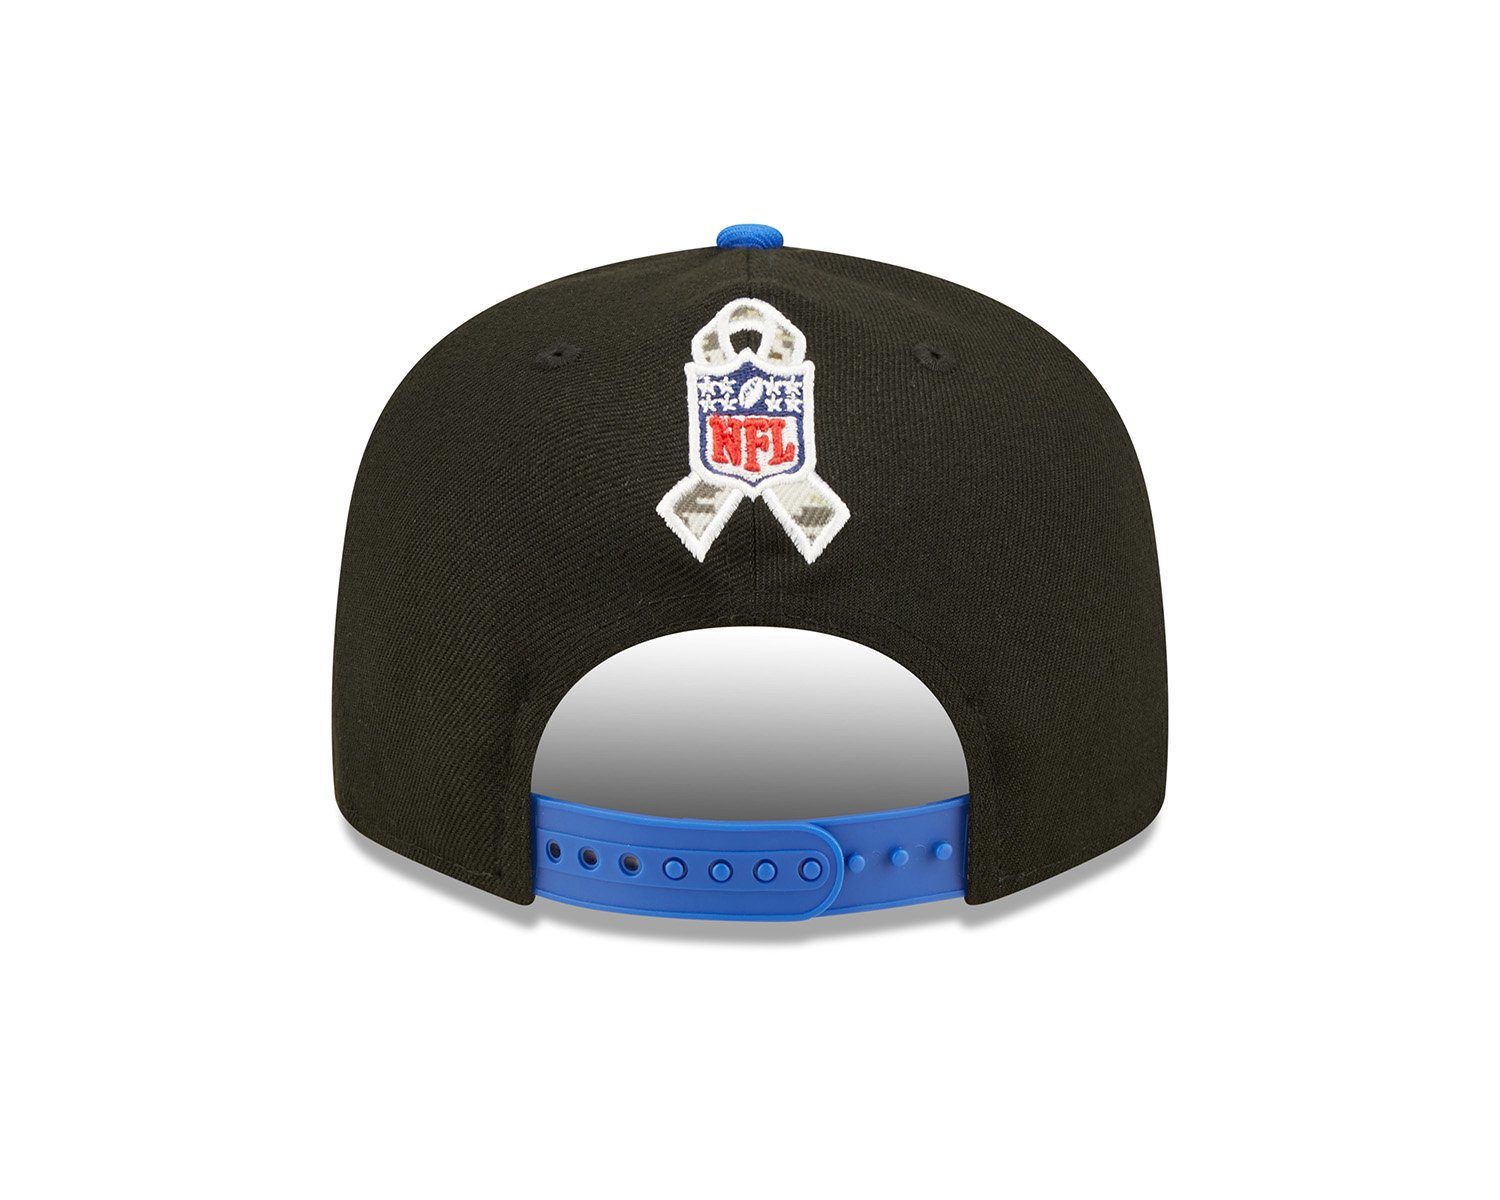 New Era Snapback Cap 9FIFTY Angeles Rams Los Salute To Service NFL22